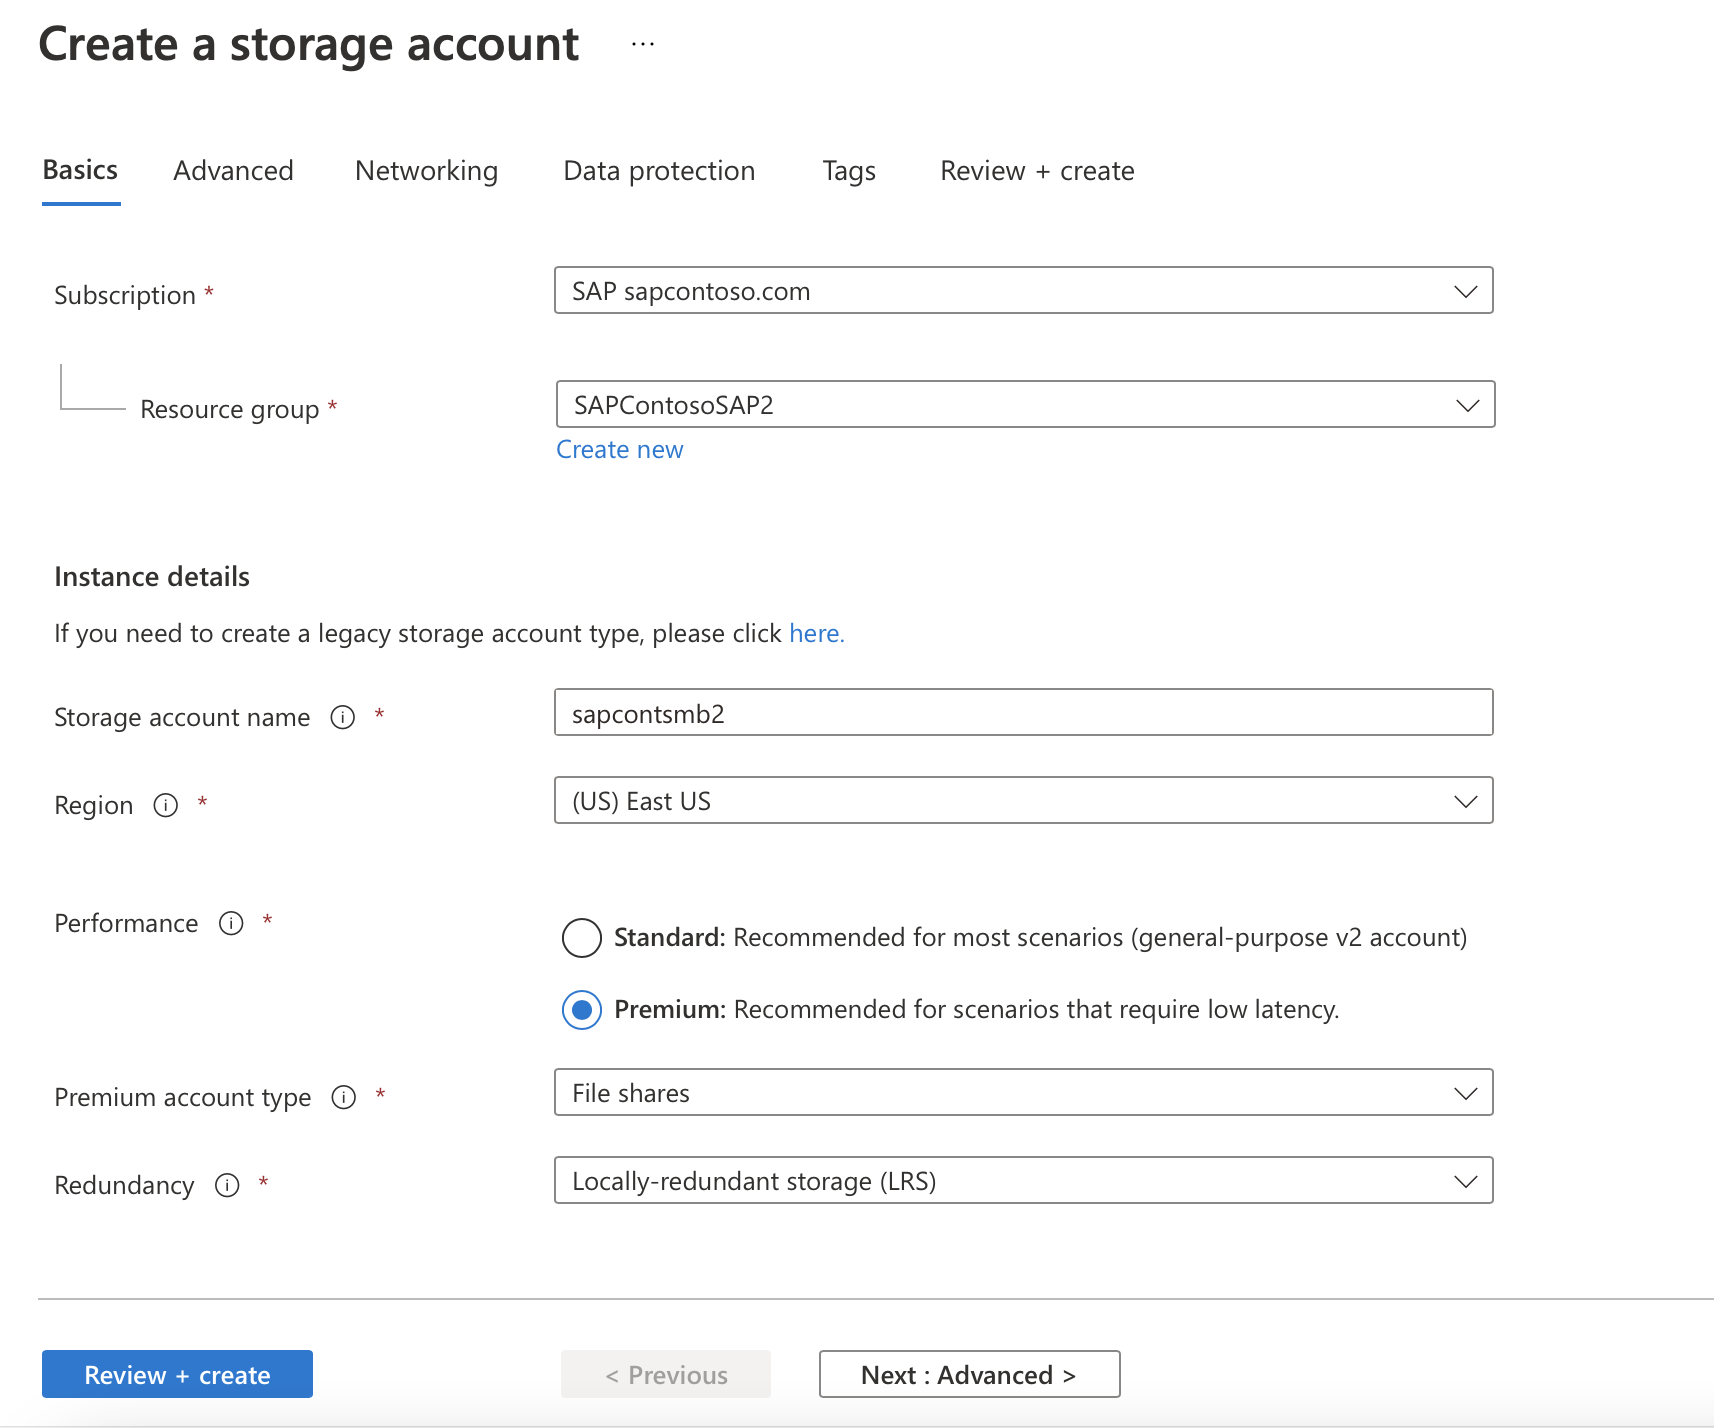 Screenshot of the Azure portal that shows basic information for creating a storage account.